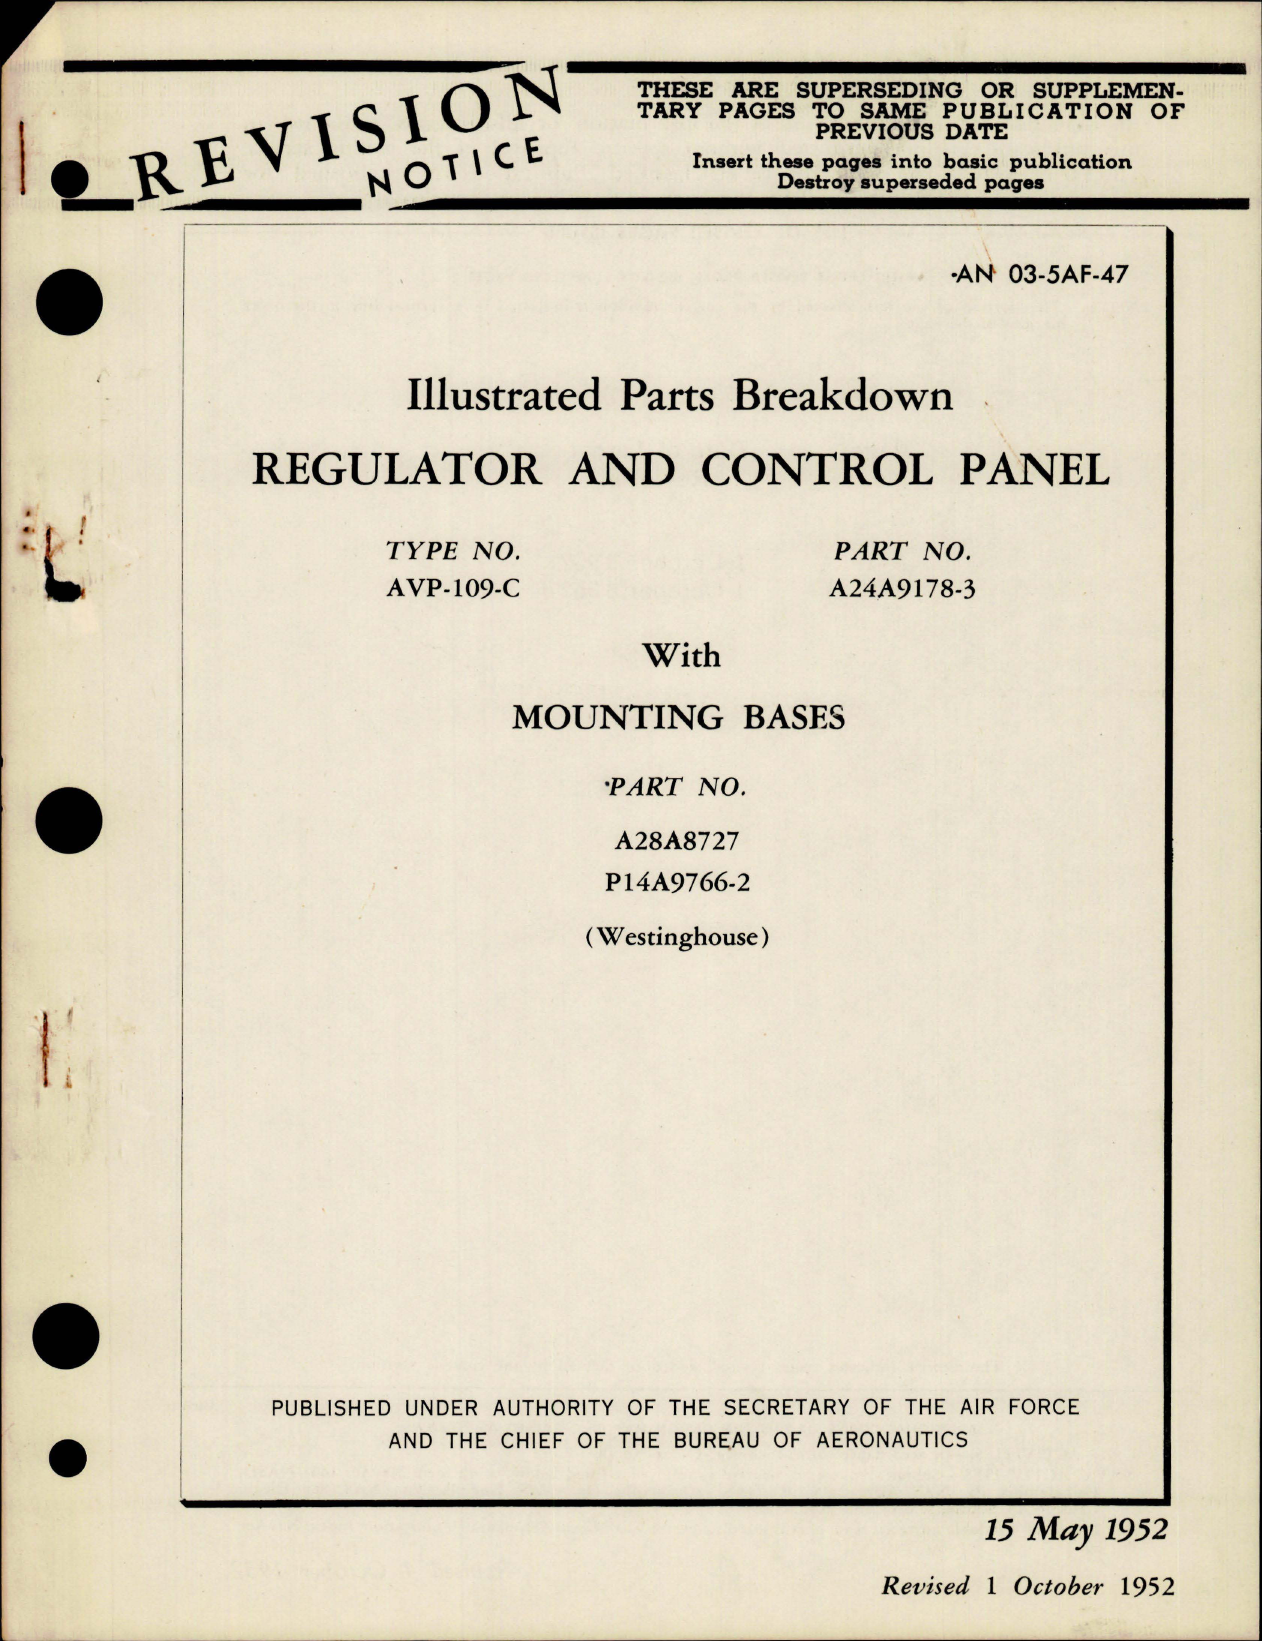 Sample page 1 from AirCorps Library document: Illustrated Parts Breakdown for Regulator and Control Panel w Mounting Bases - Parts A24A9178-3, A28A8727 - Type AVP-109-C 